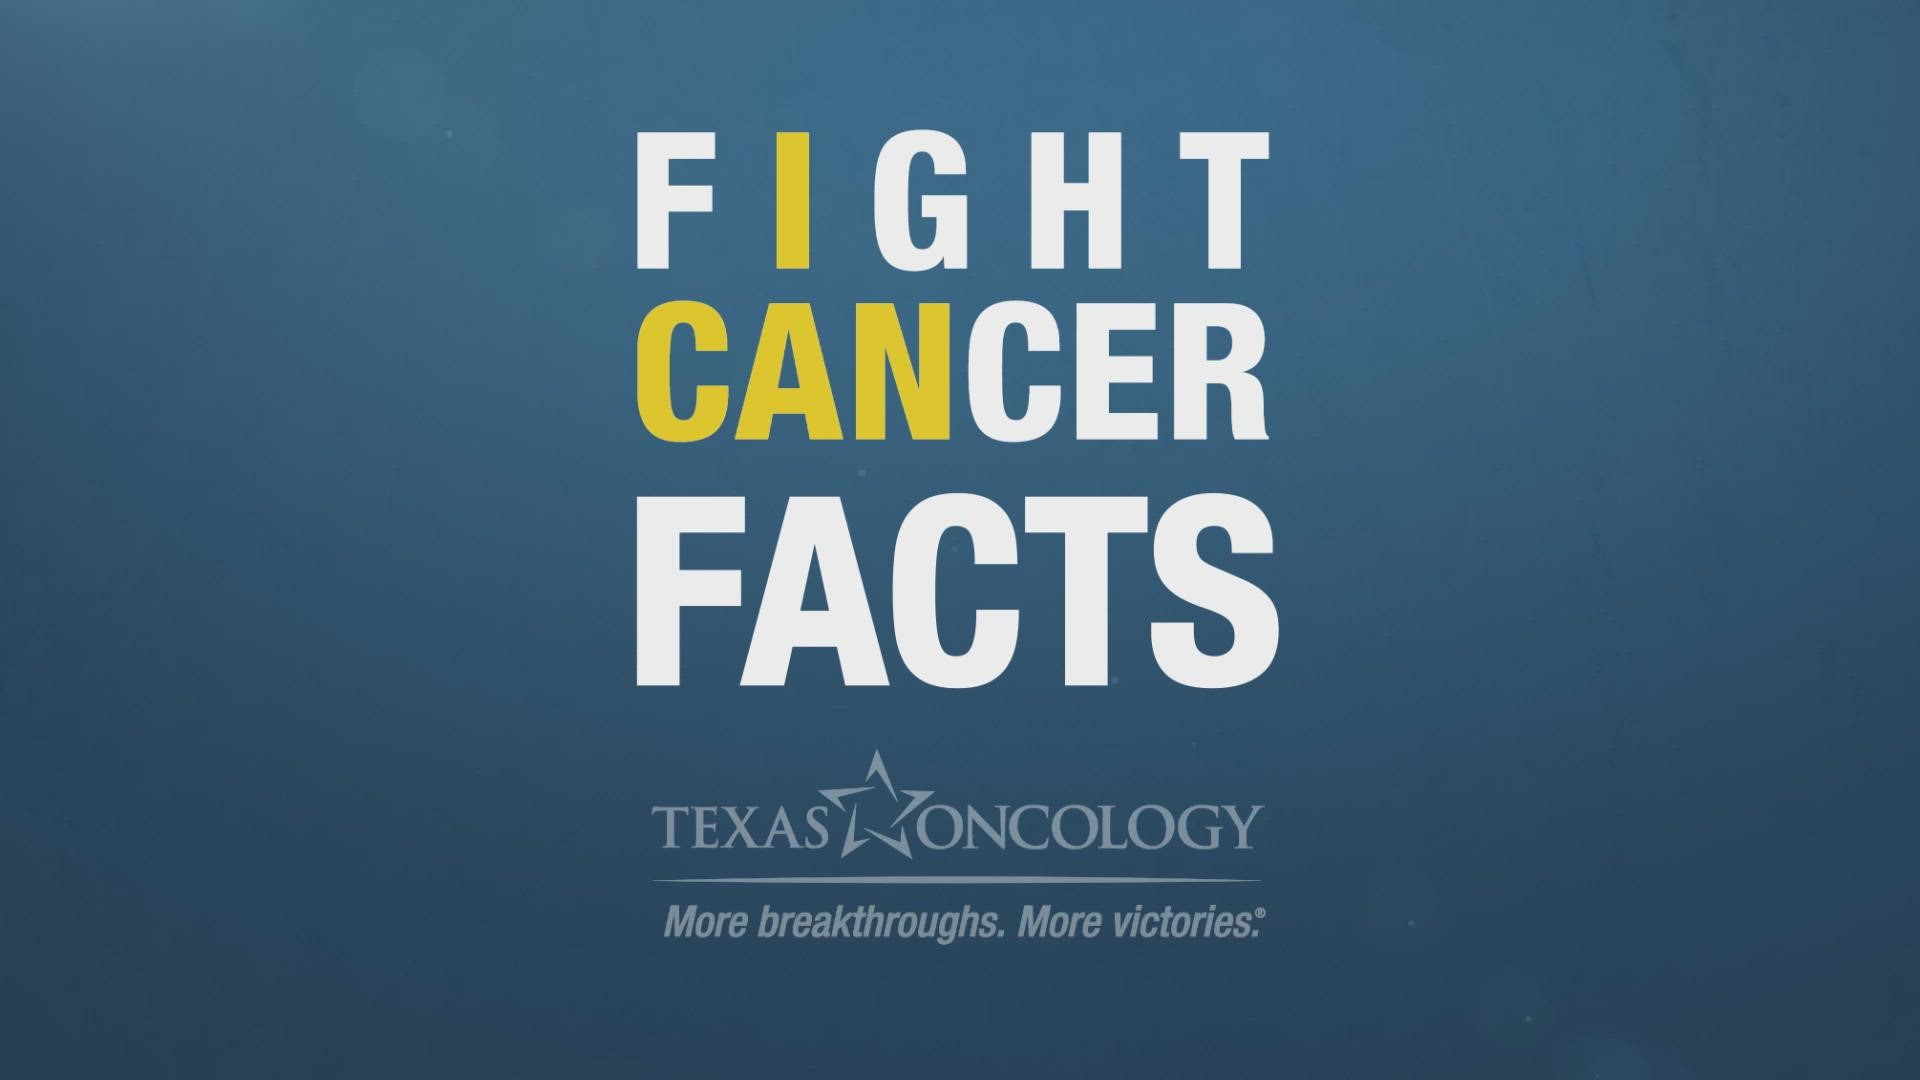 A local Texas Oncology doctor shares how to reduce the risk of breast cancer, which is the most diagnosed cancer in American women.